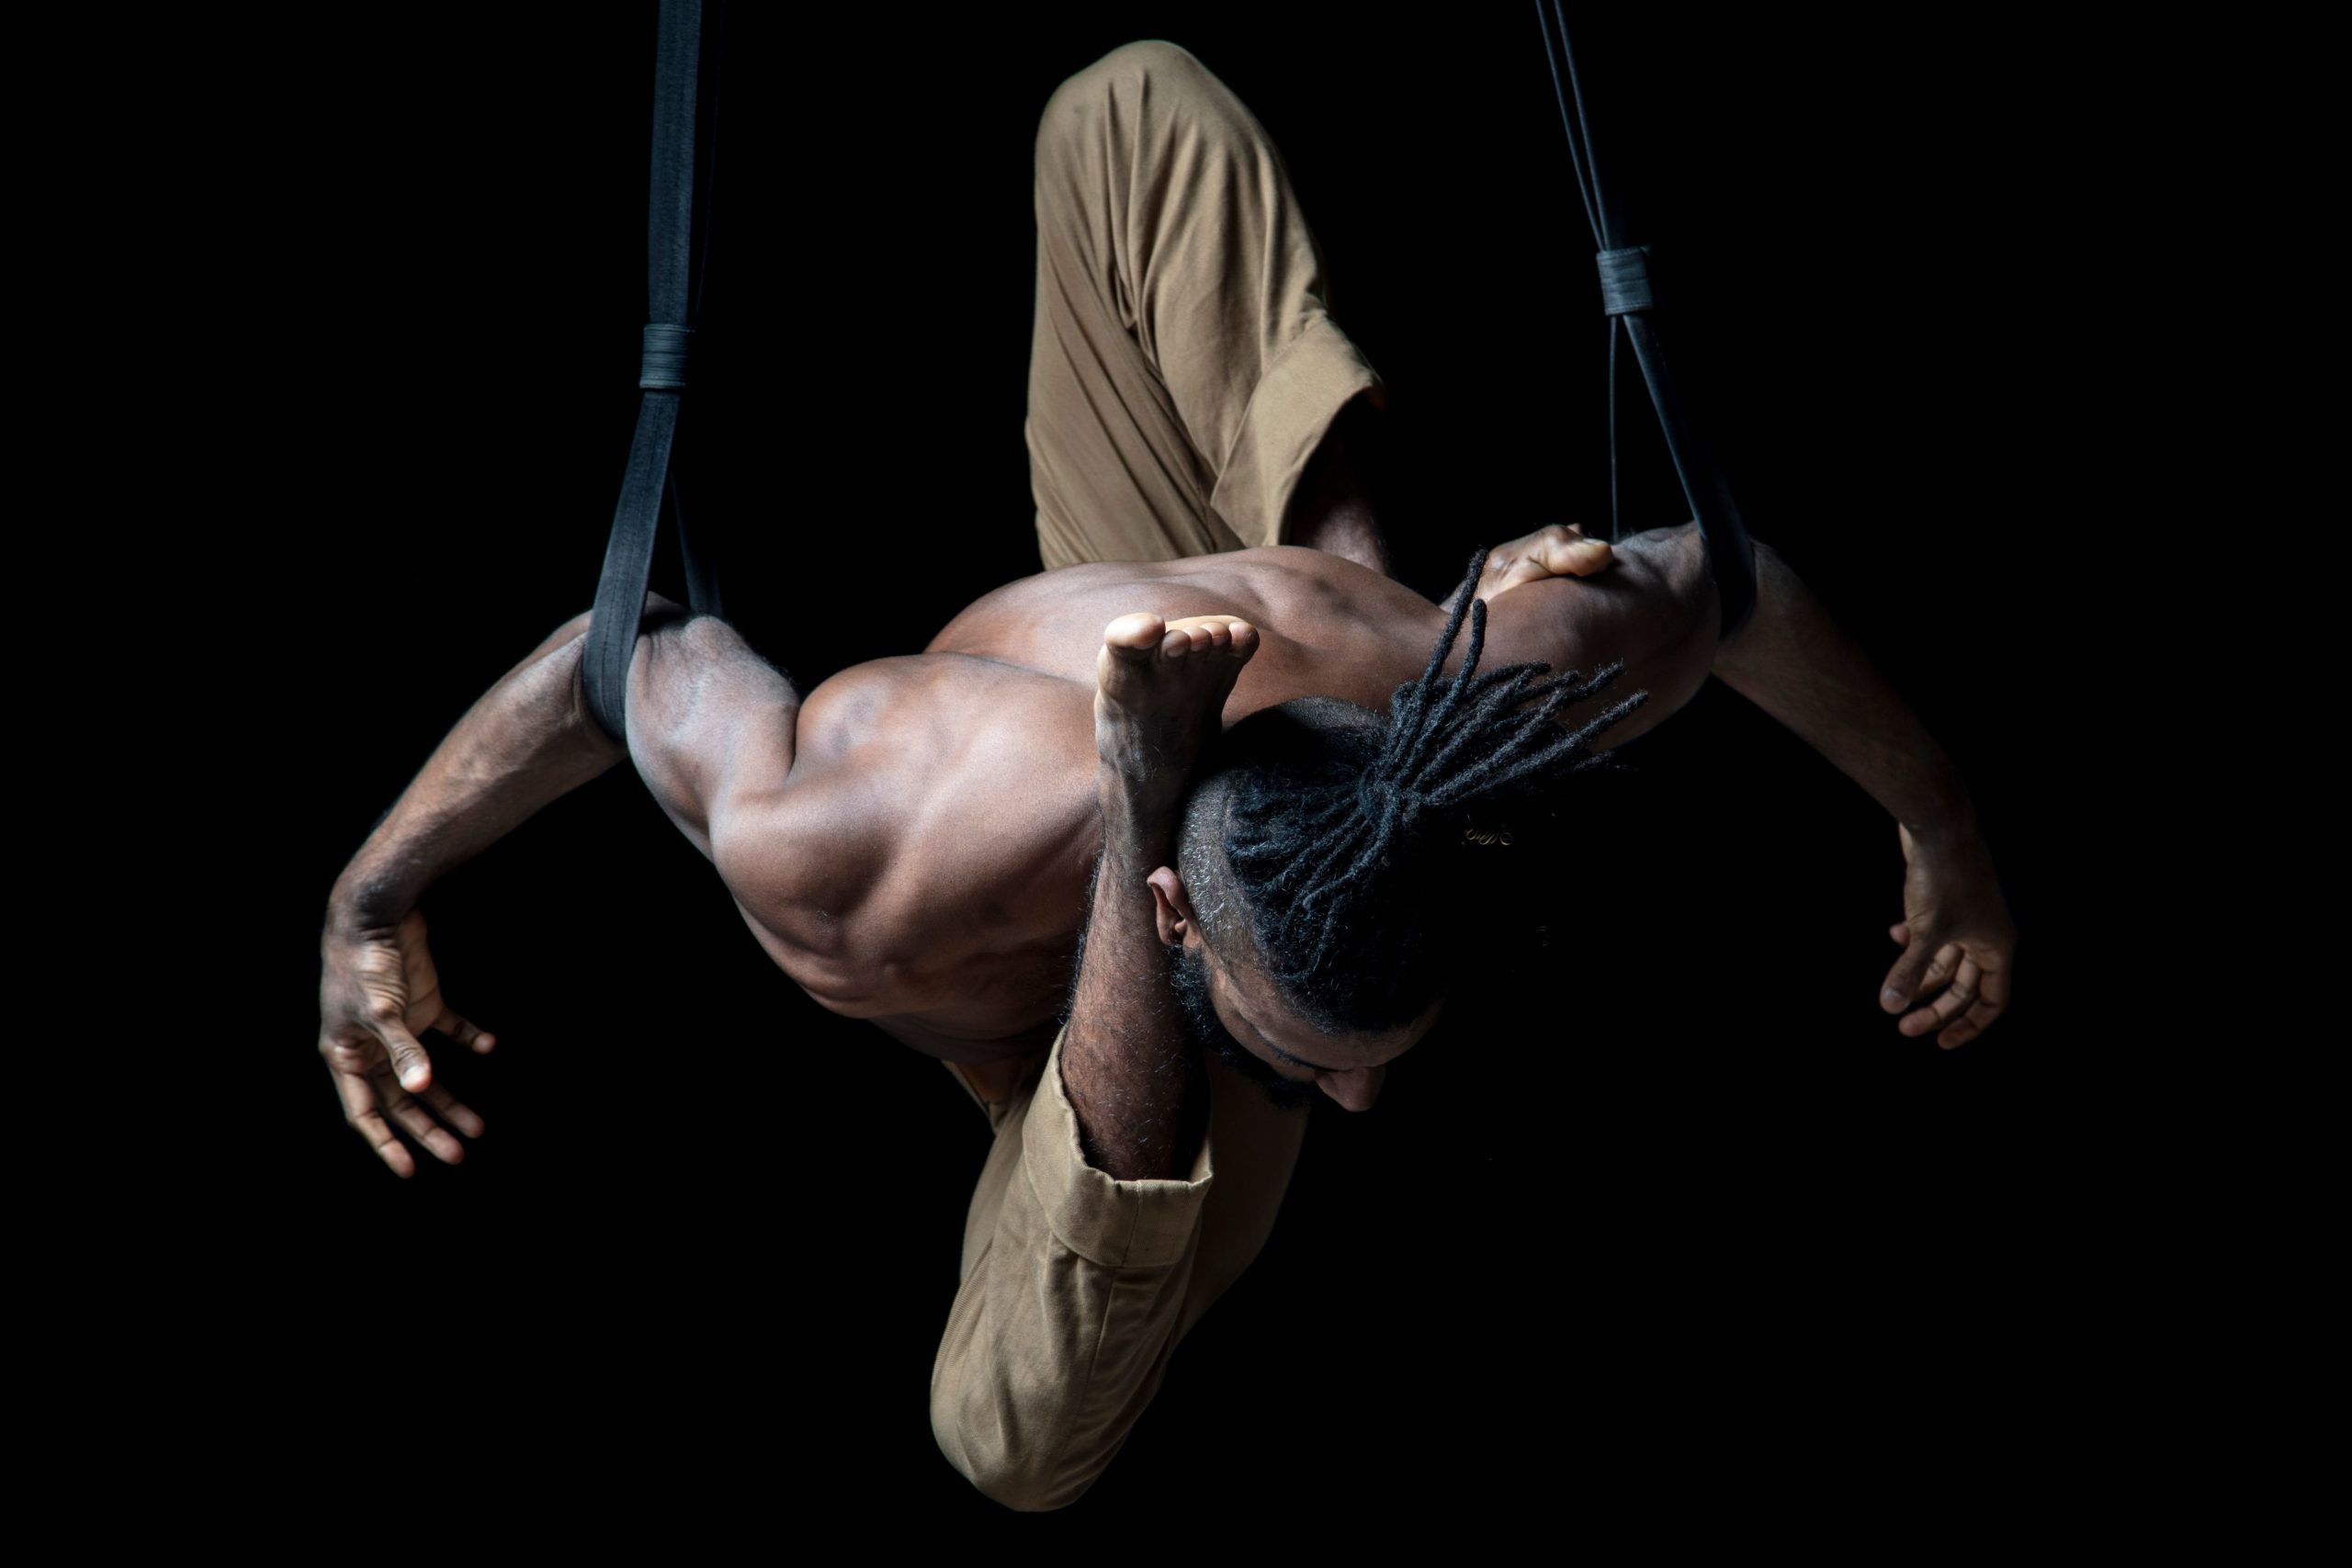 Acrobatic Rope Porn - Register now for Virtual Aerial Dance Festival 2020! - Aerial Dance Classes  Boulder | Frequent Flyers